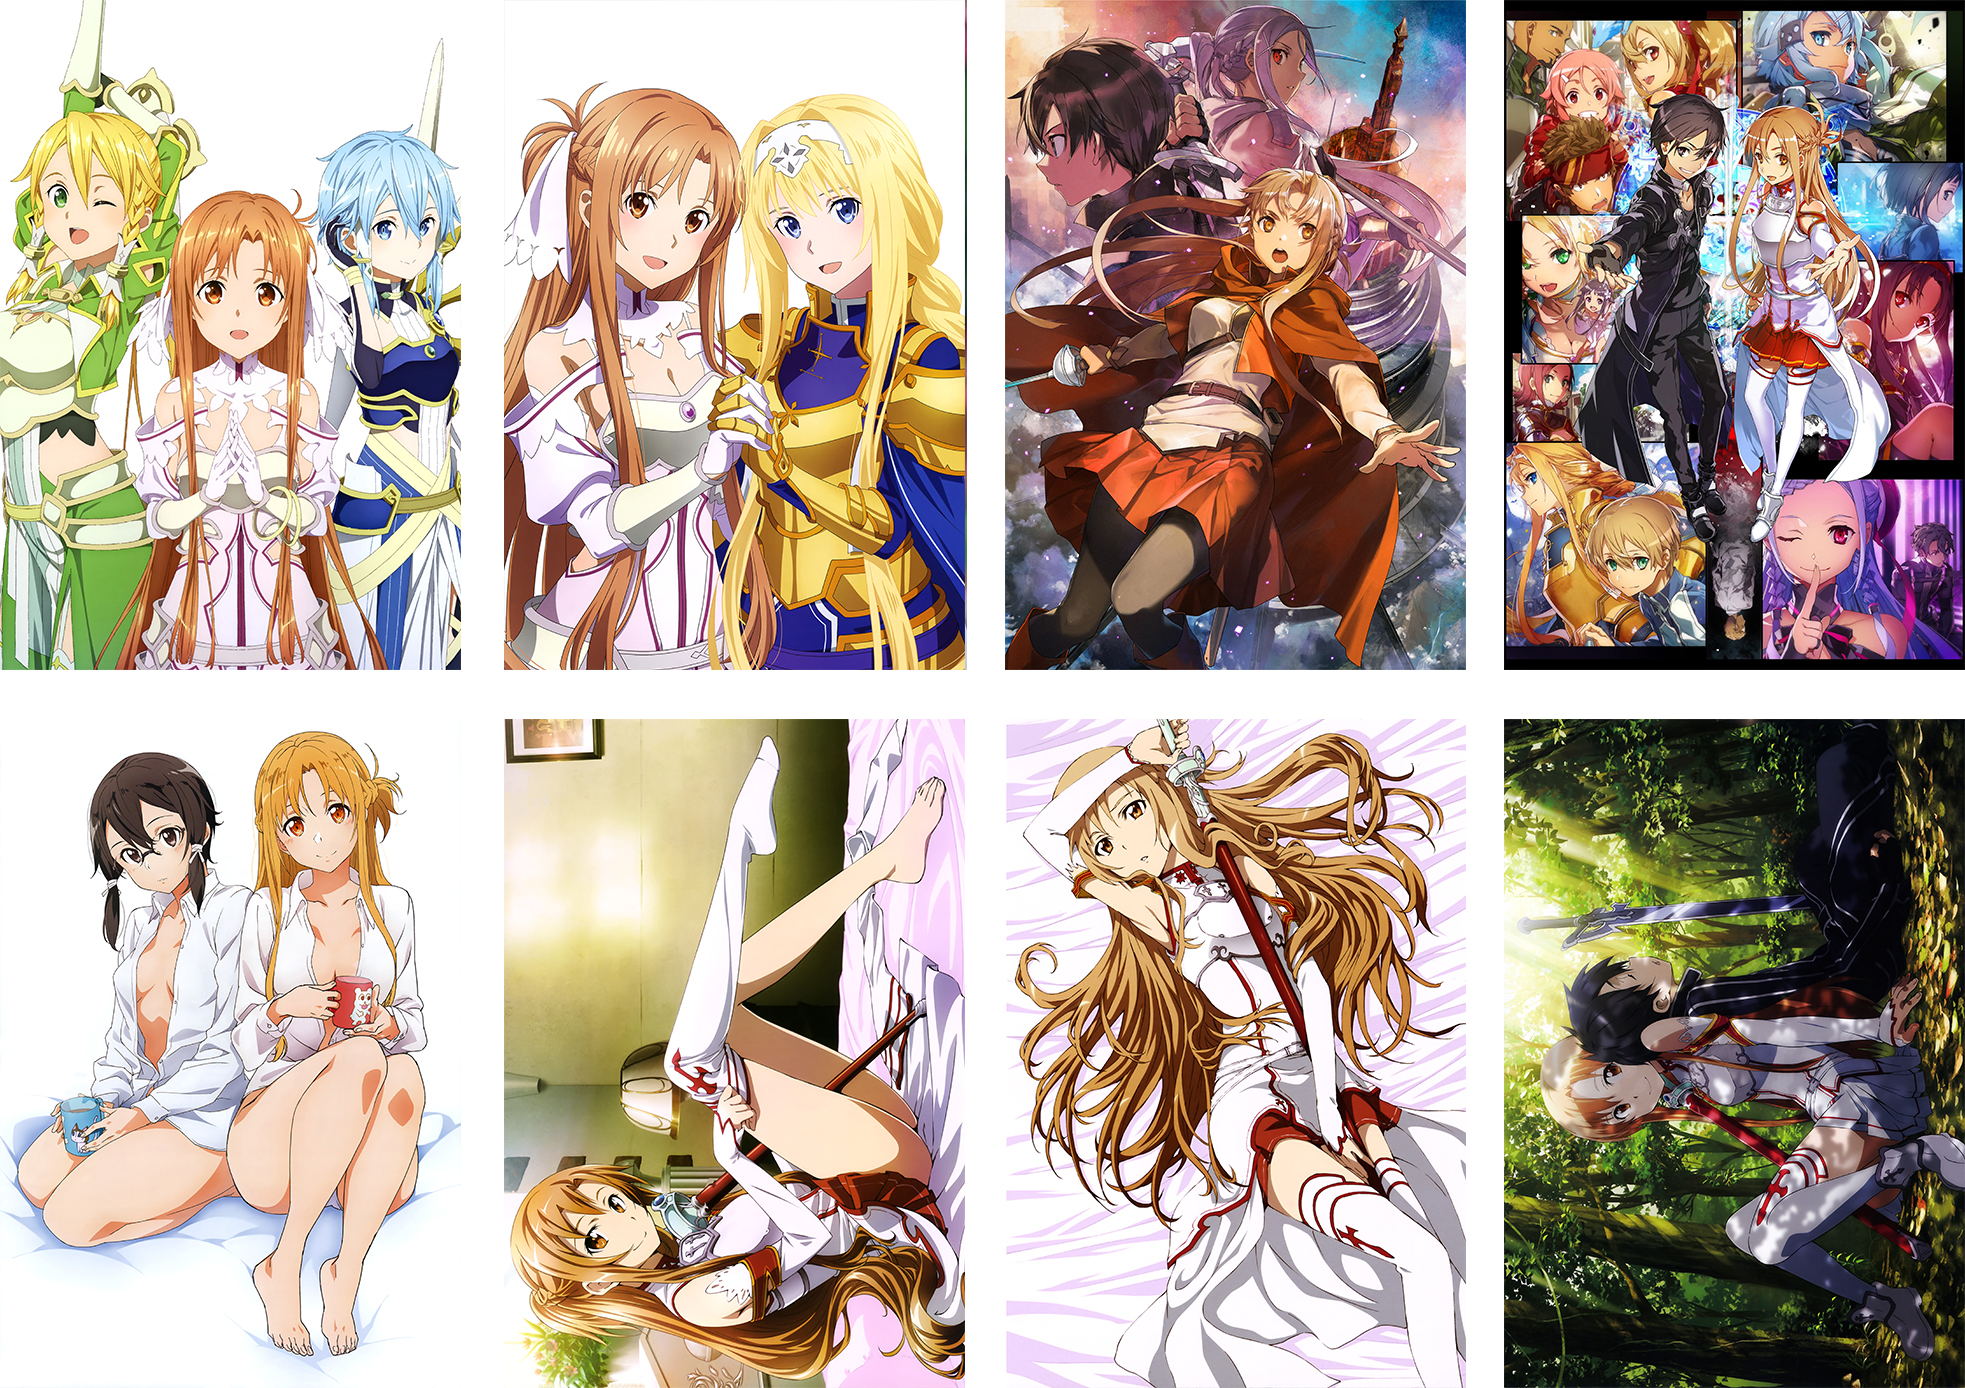 Sword art online anime anime posters price for a set of 8 pcs